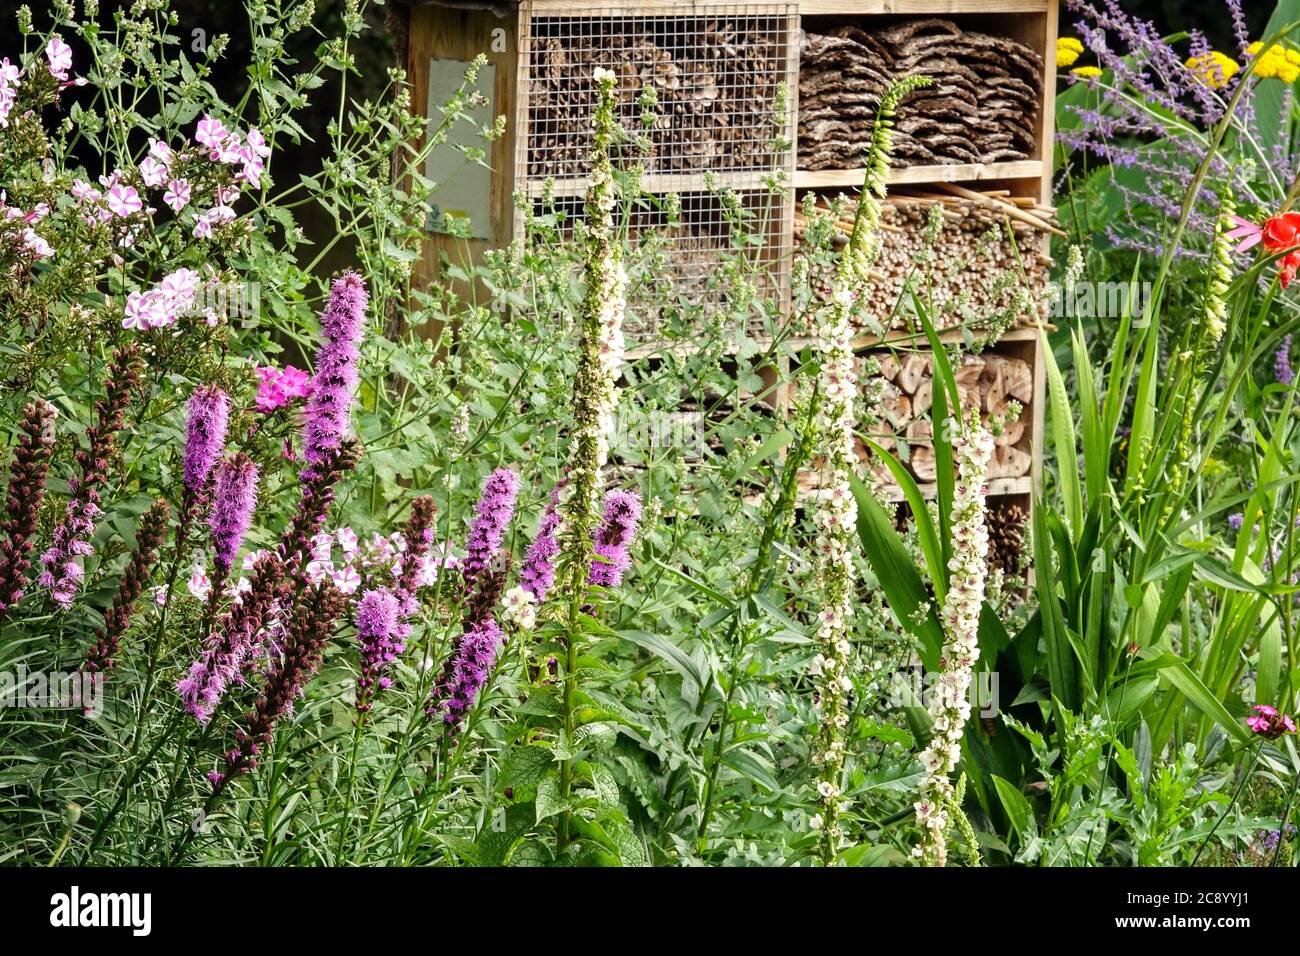 Insect shelter Overgrown garden insect hotel encouraging wildlife in the garden Stock Photo